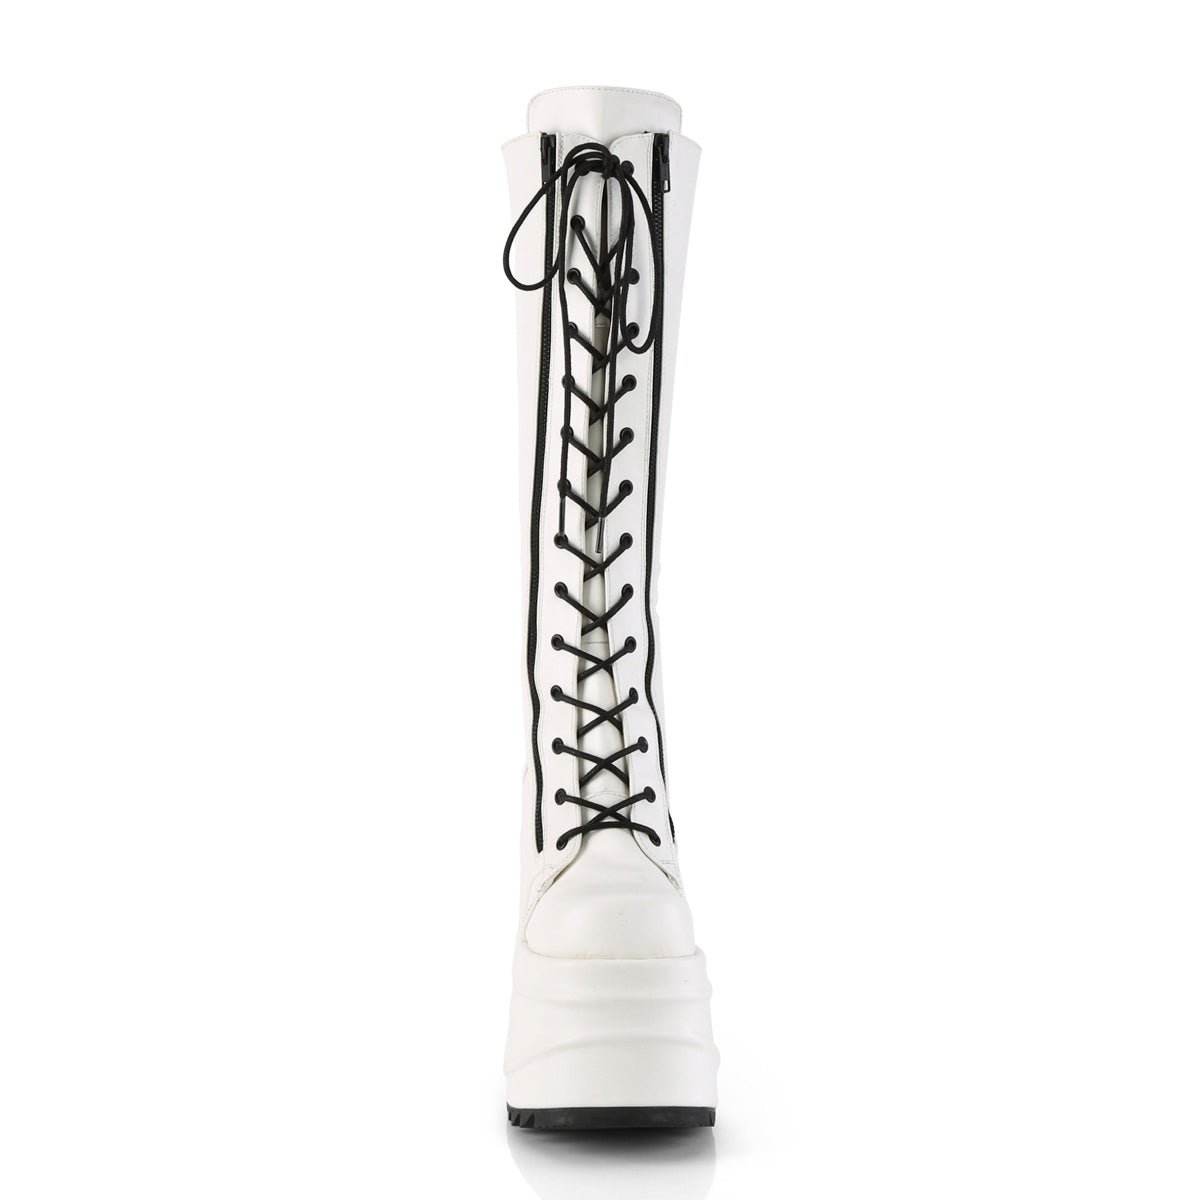 Too Fast | Demonia Wave 200 | White Vegan Leather Women's Knee High Boots